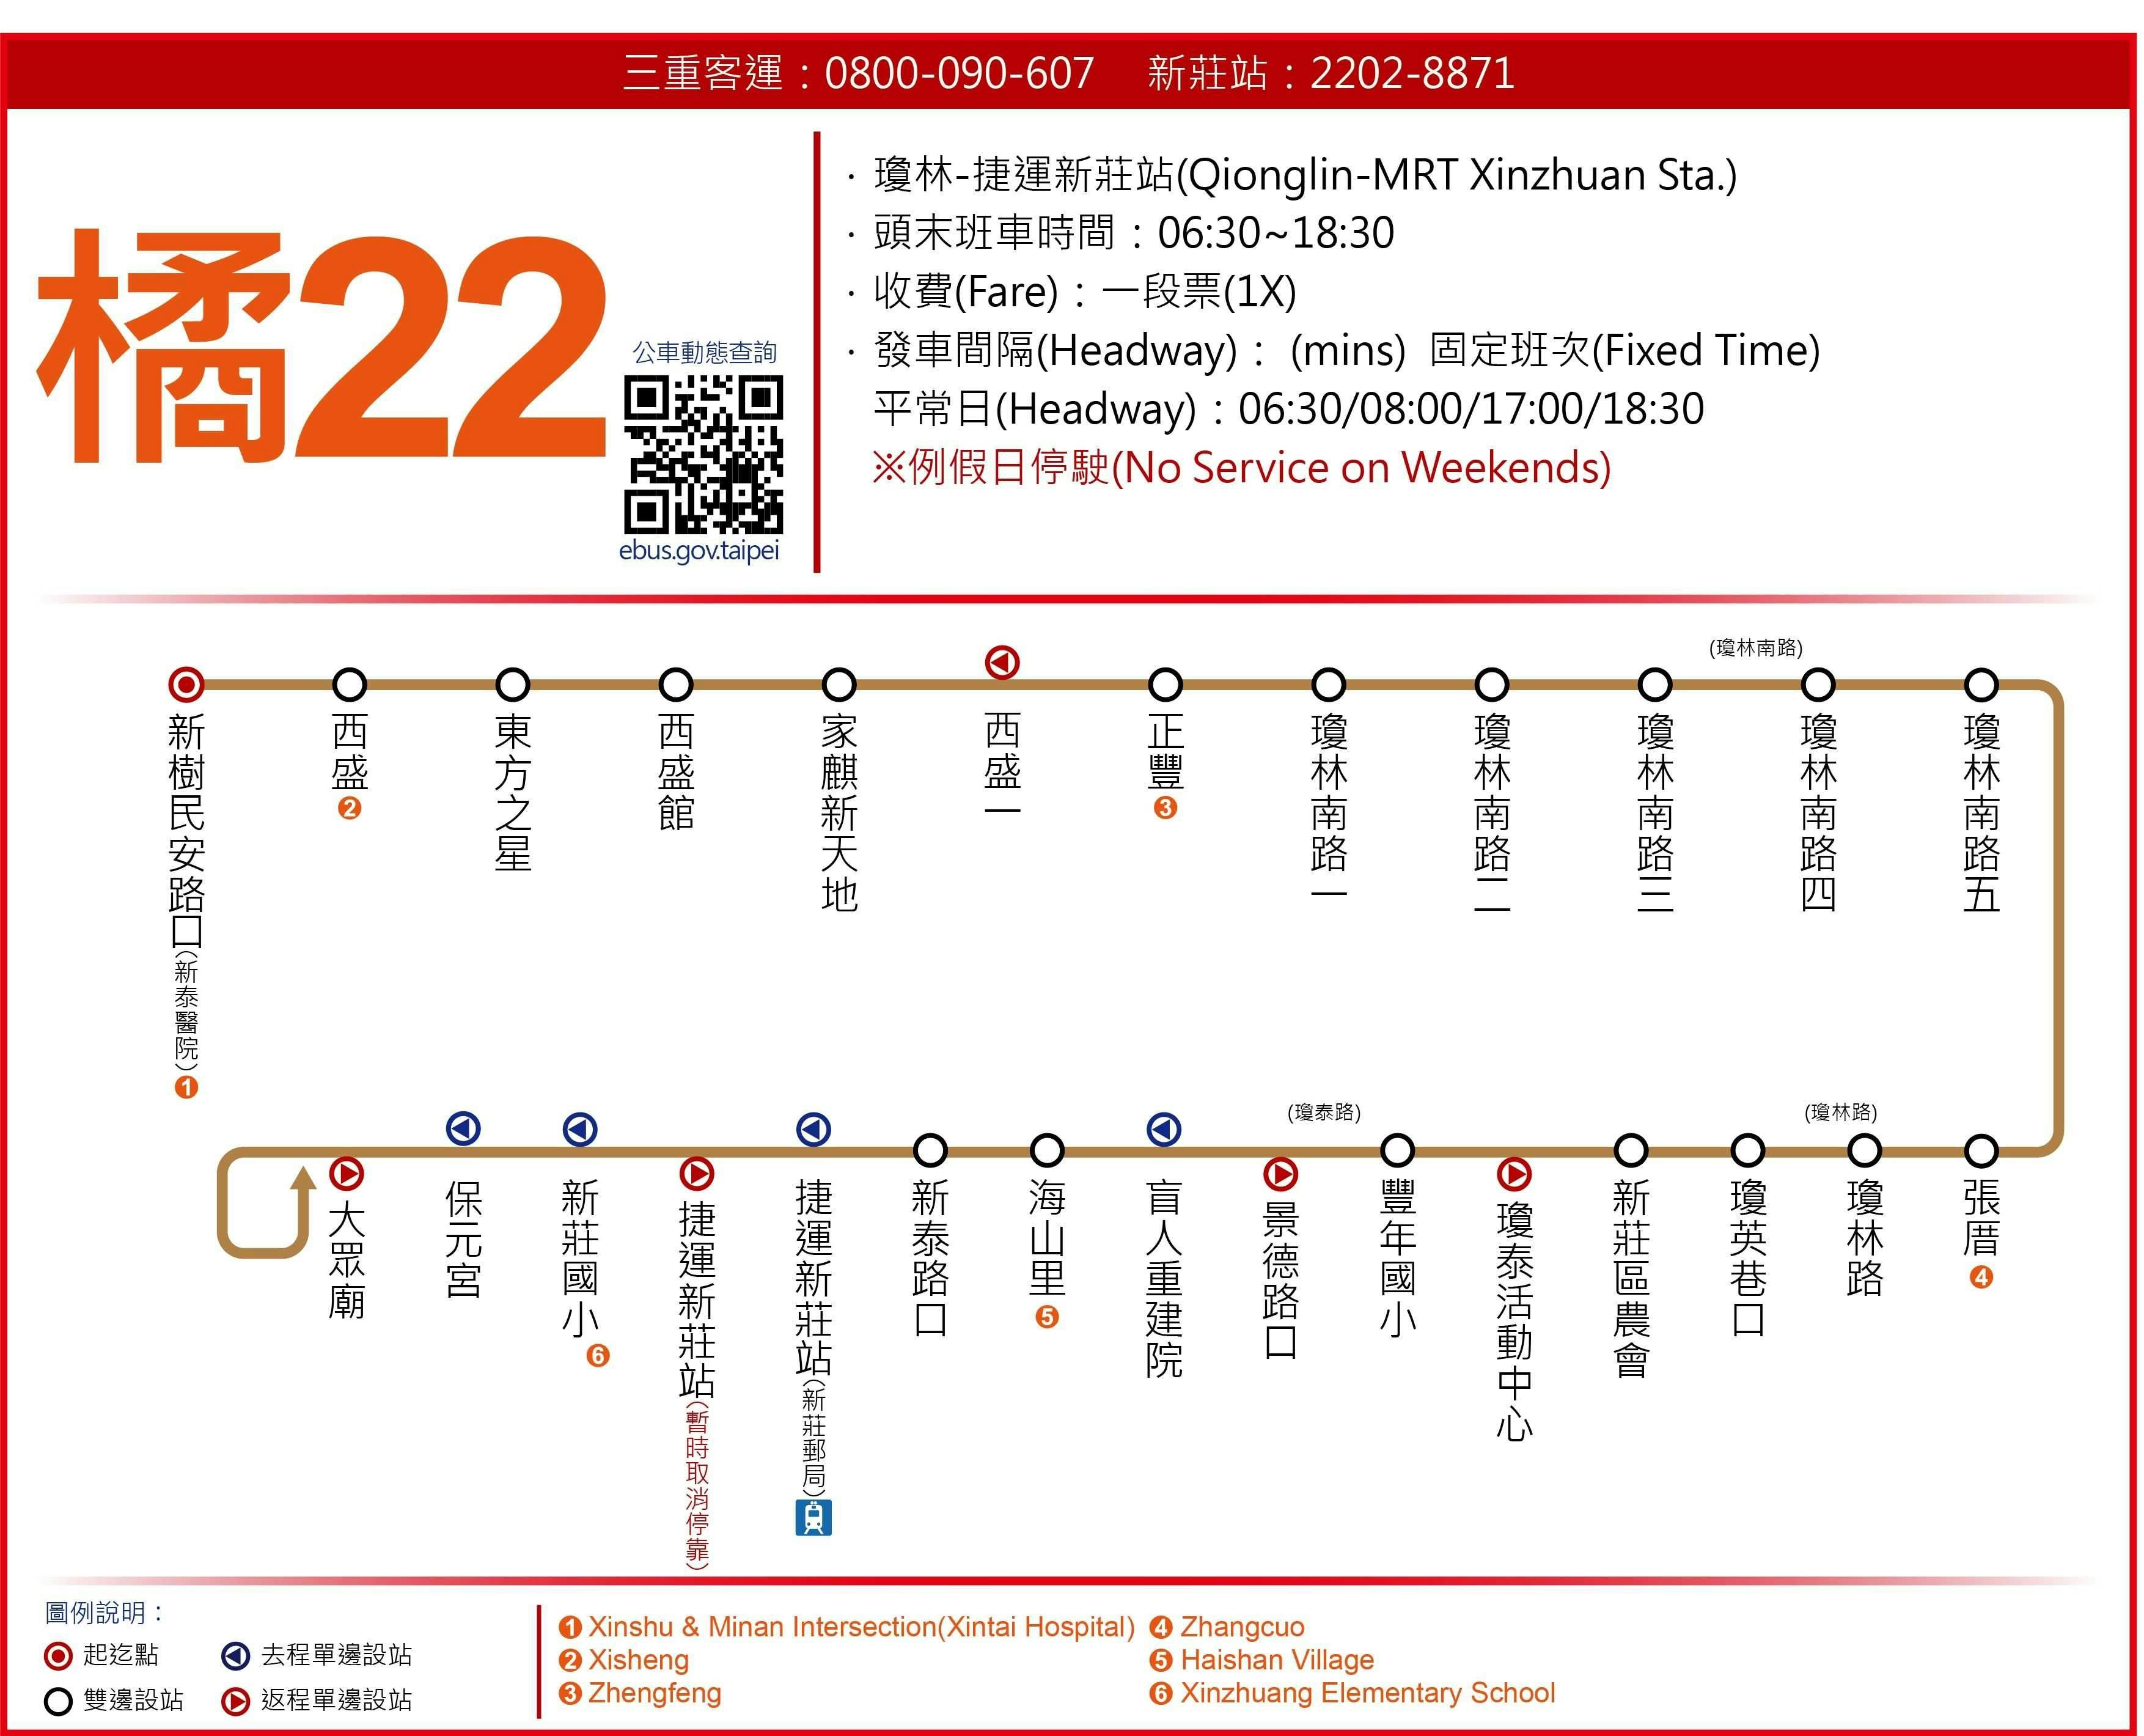 O22Route Map-新北市 Bus